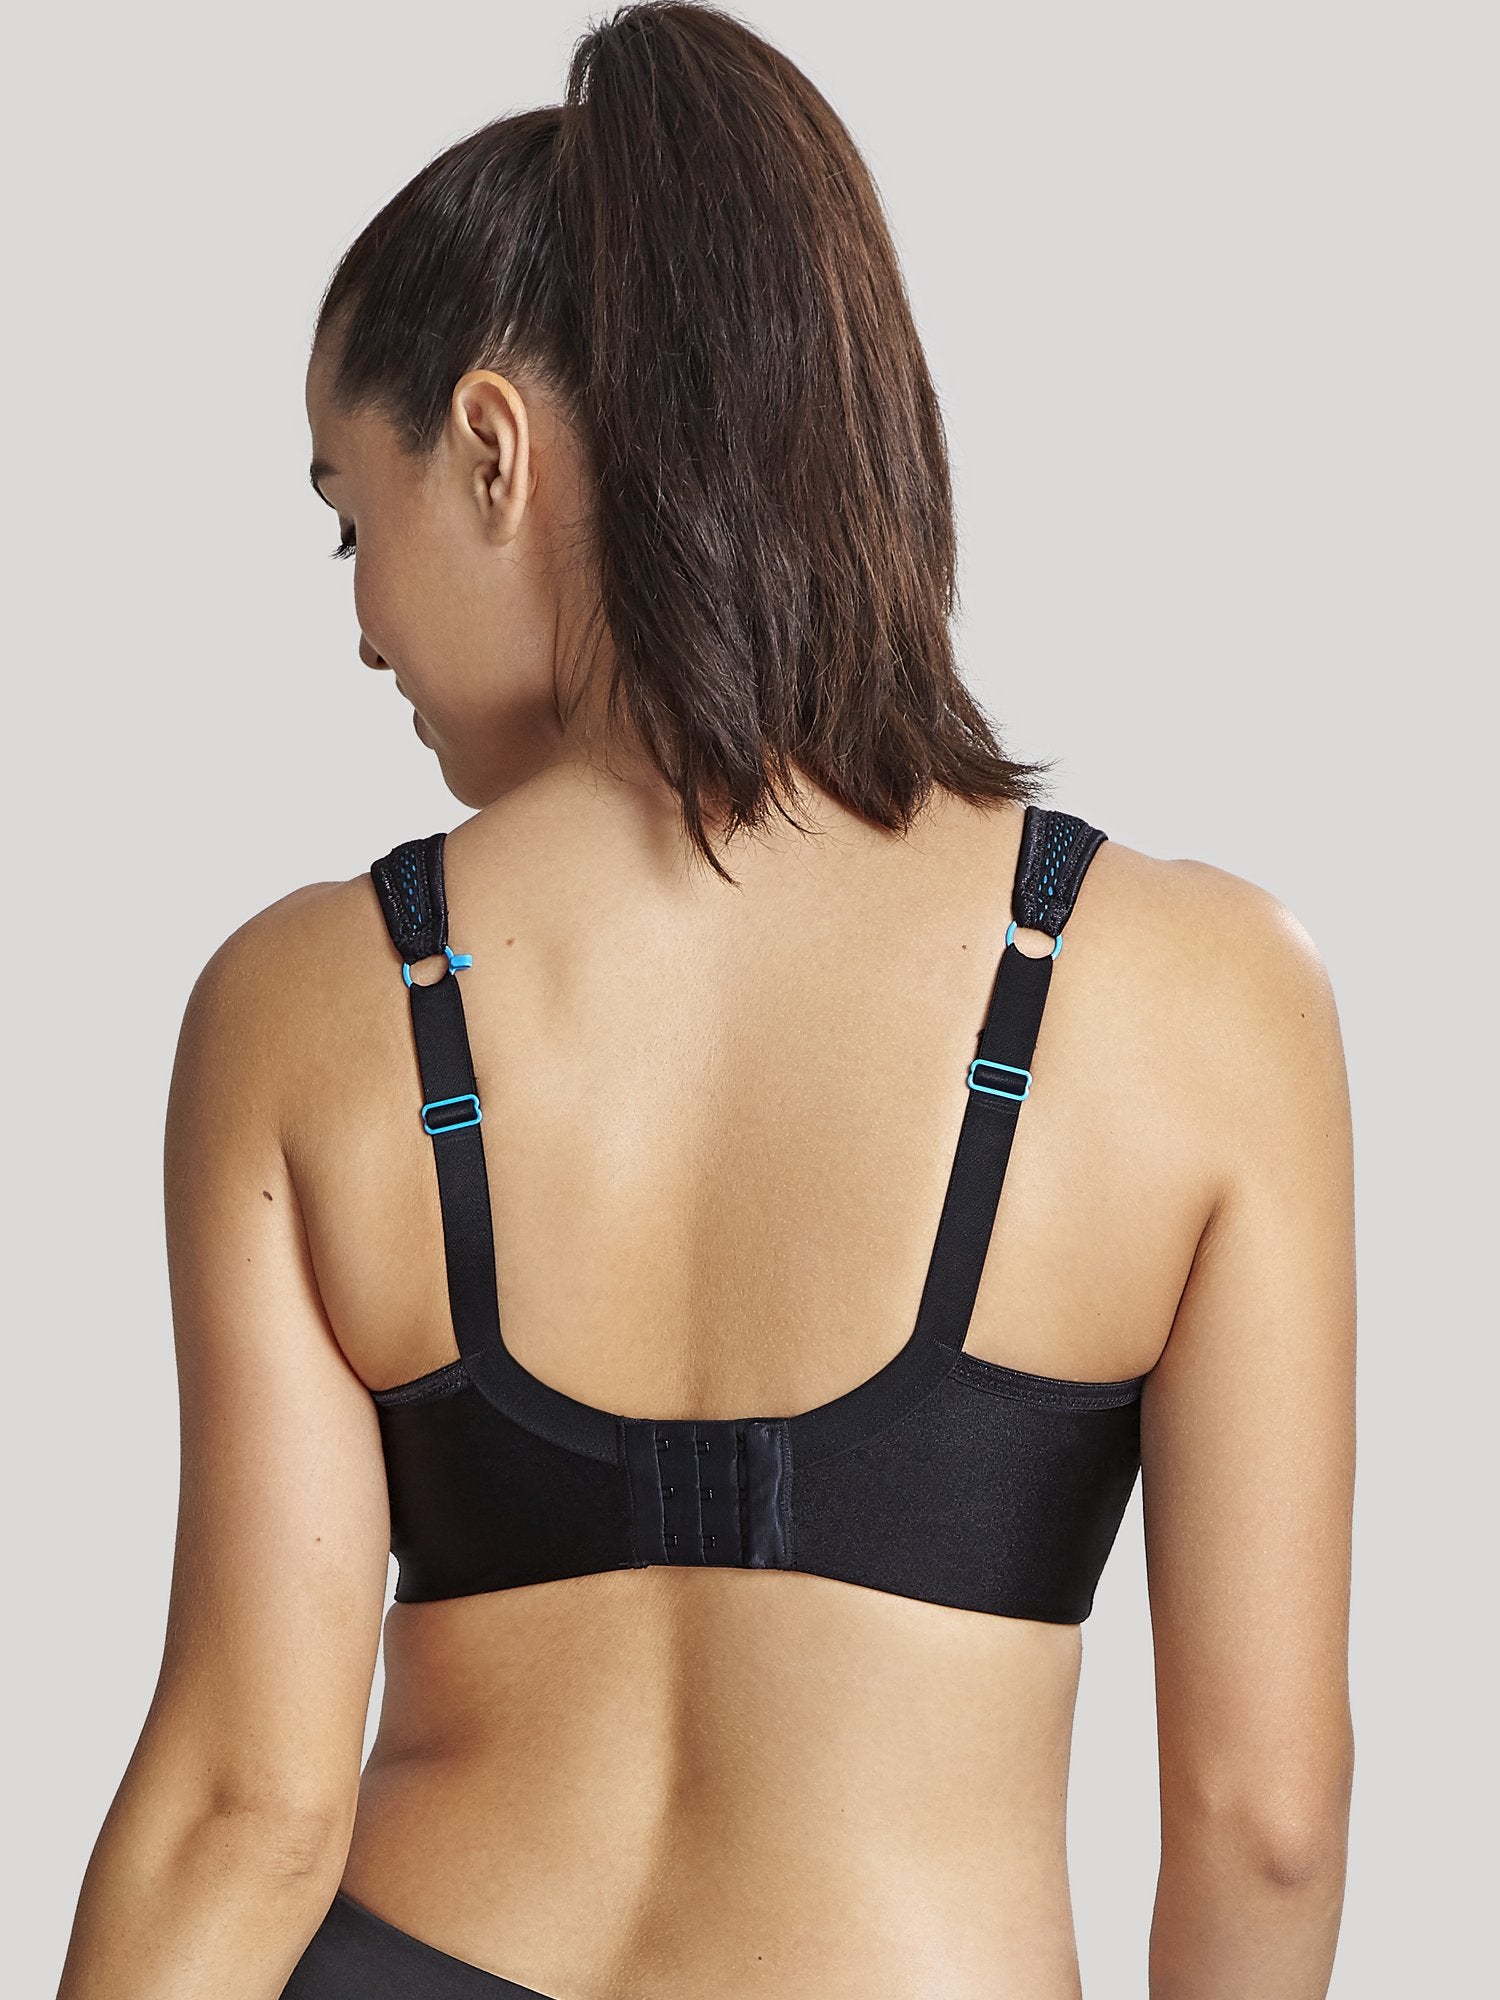 Panache Sports Wire Free - Sports Wirefree Bra  Available at Illusions Lingerie